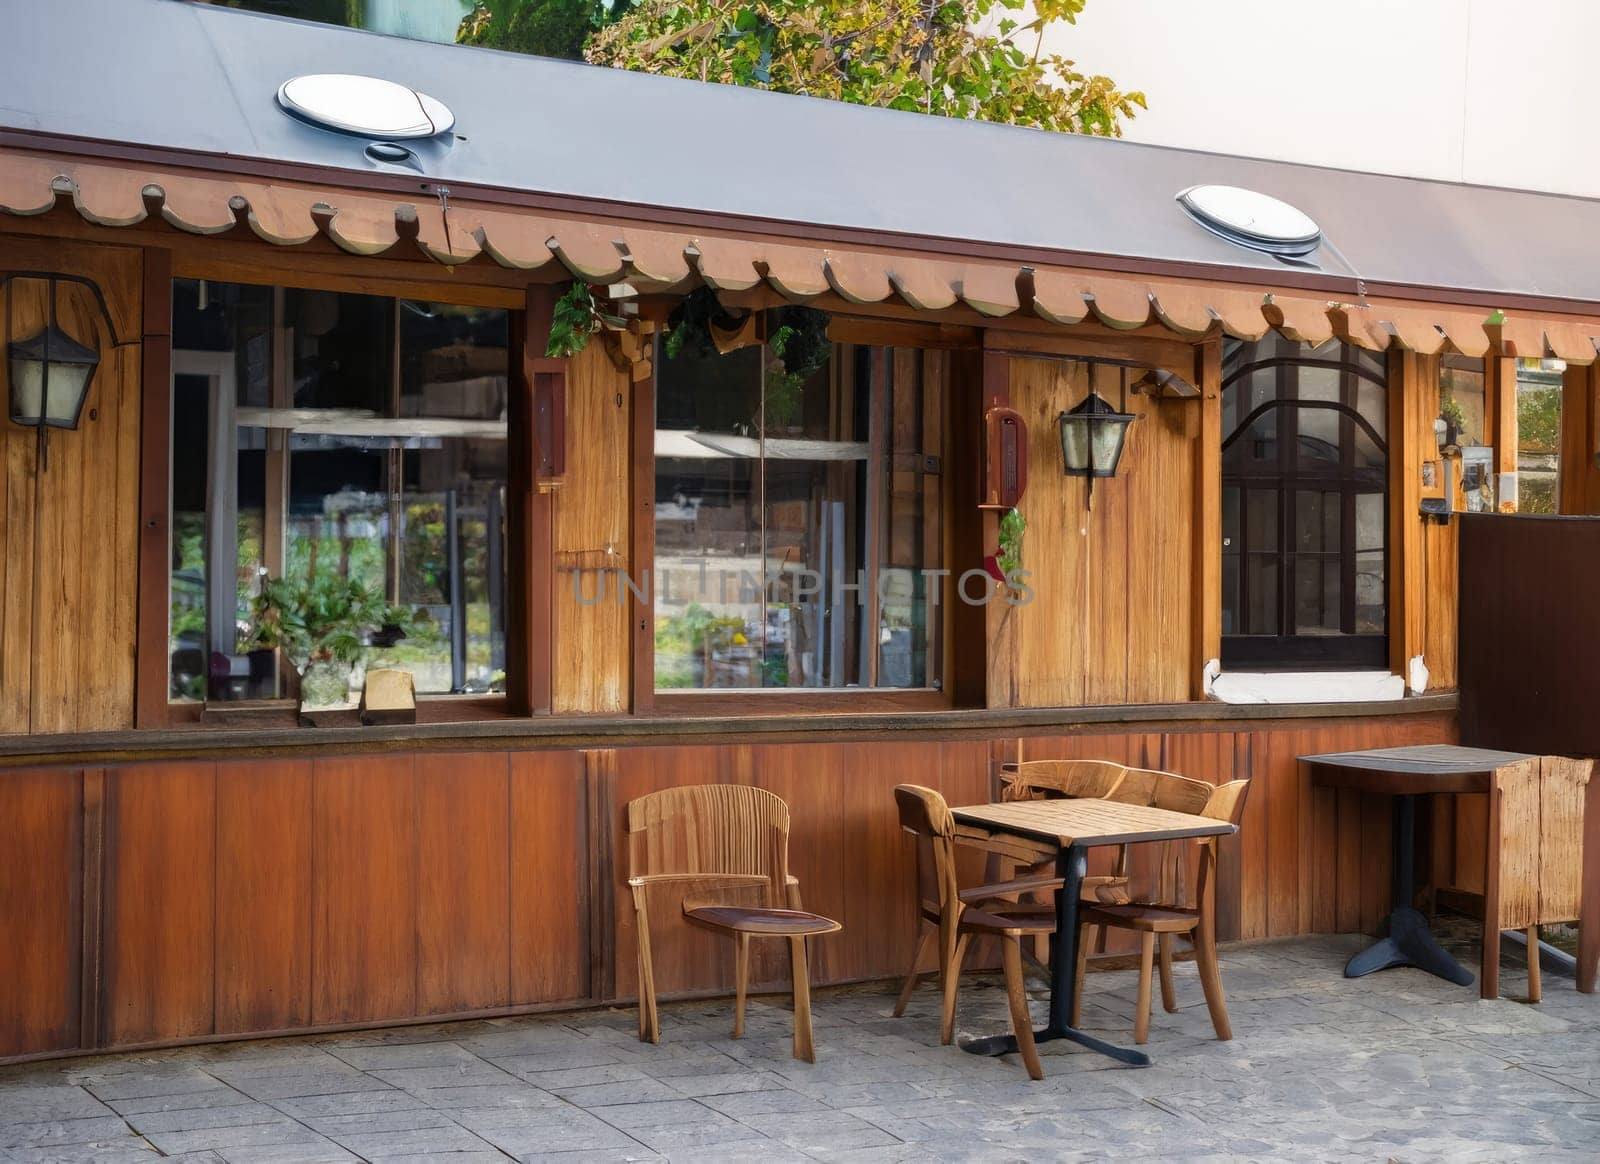 Exterior of small European wooden cafe or restaurant. with copy space.